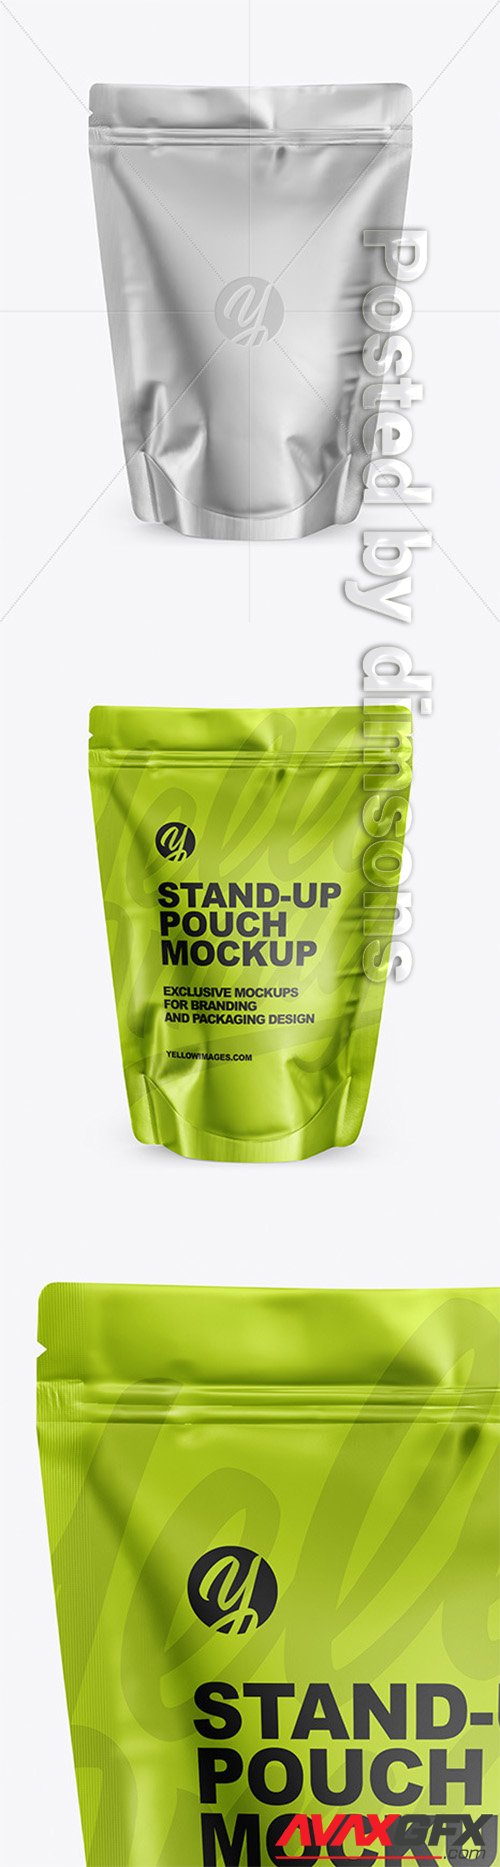 Metallic Stand-Up Pouch Mockup 65203